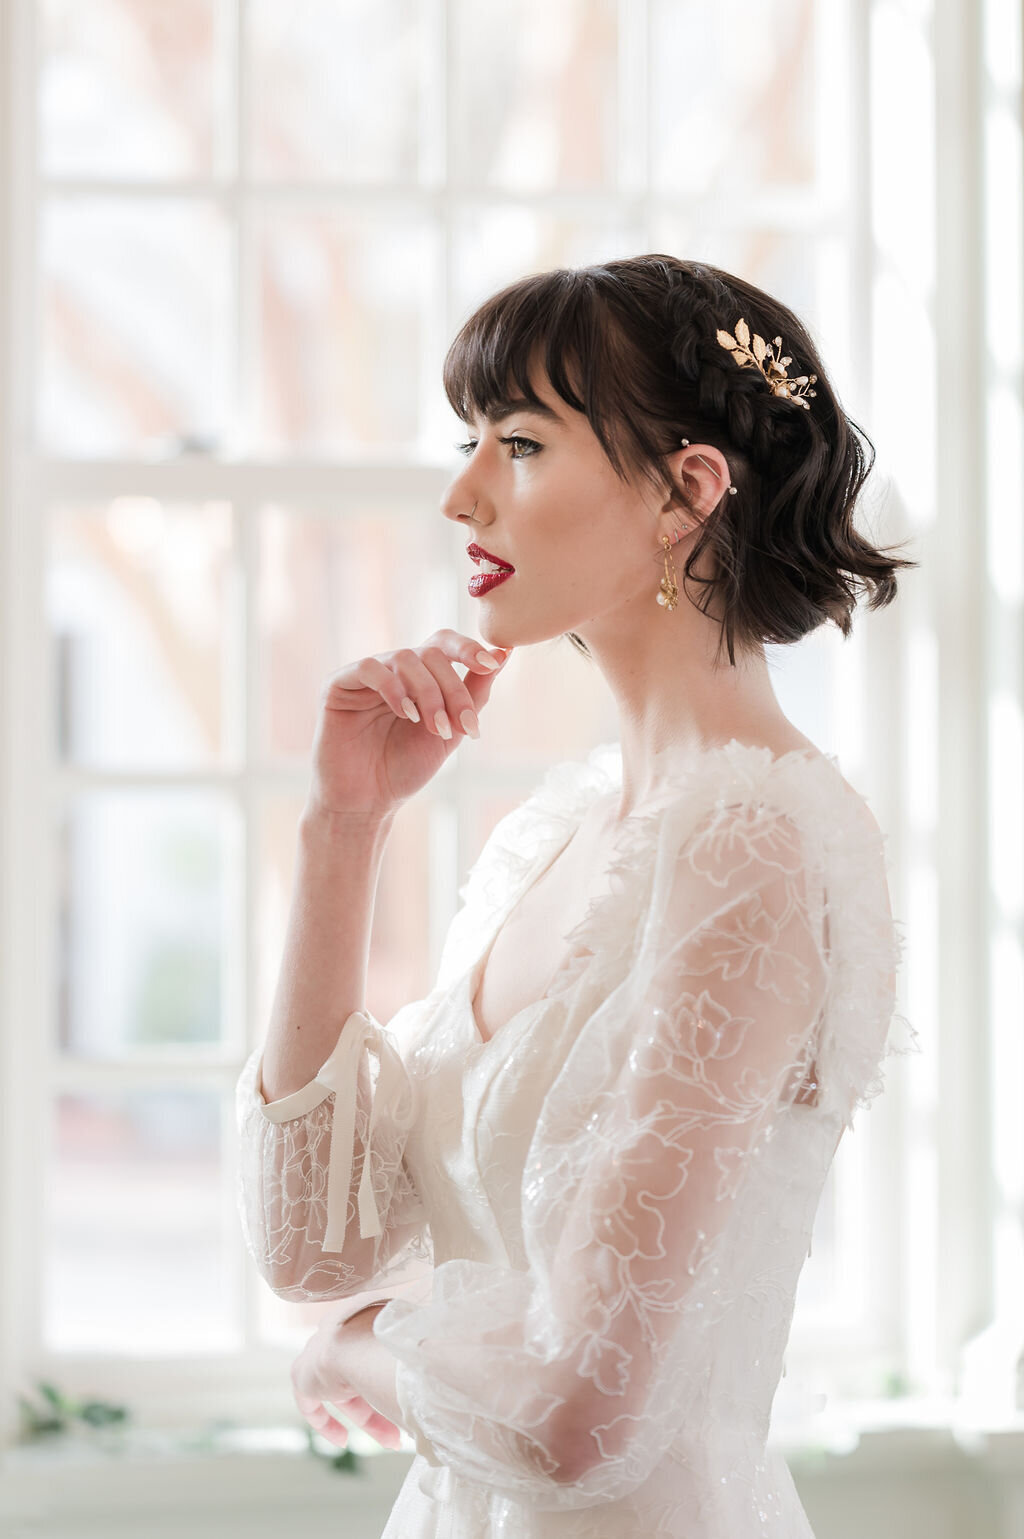 Sparkly sheer lace three-quarter sleeves and 3D flower shoulder details on the Gene wedding dress style by Edith Elan.